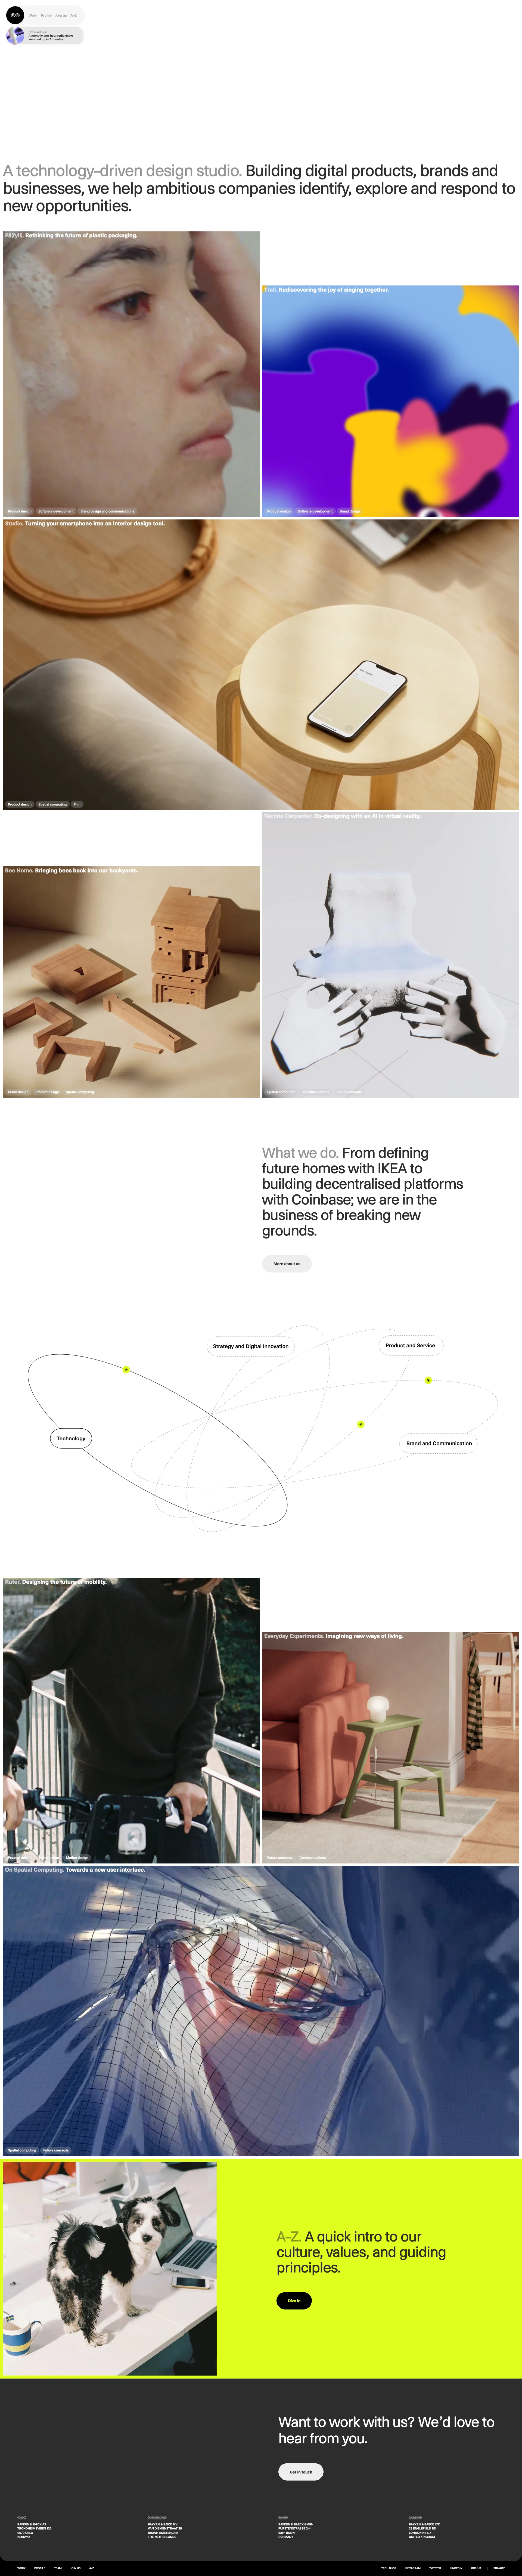 Bakken & Bæck Landing Page Example: A technology-driven design studio. Building digital products, brands and businesses, we help ambitious companies identify, explore and respond to new opportunities.